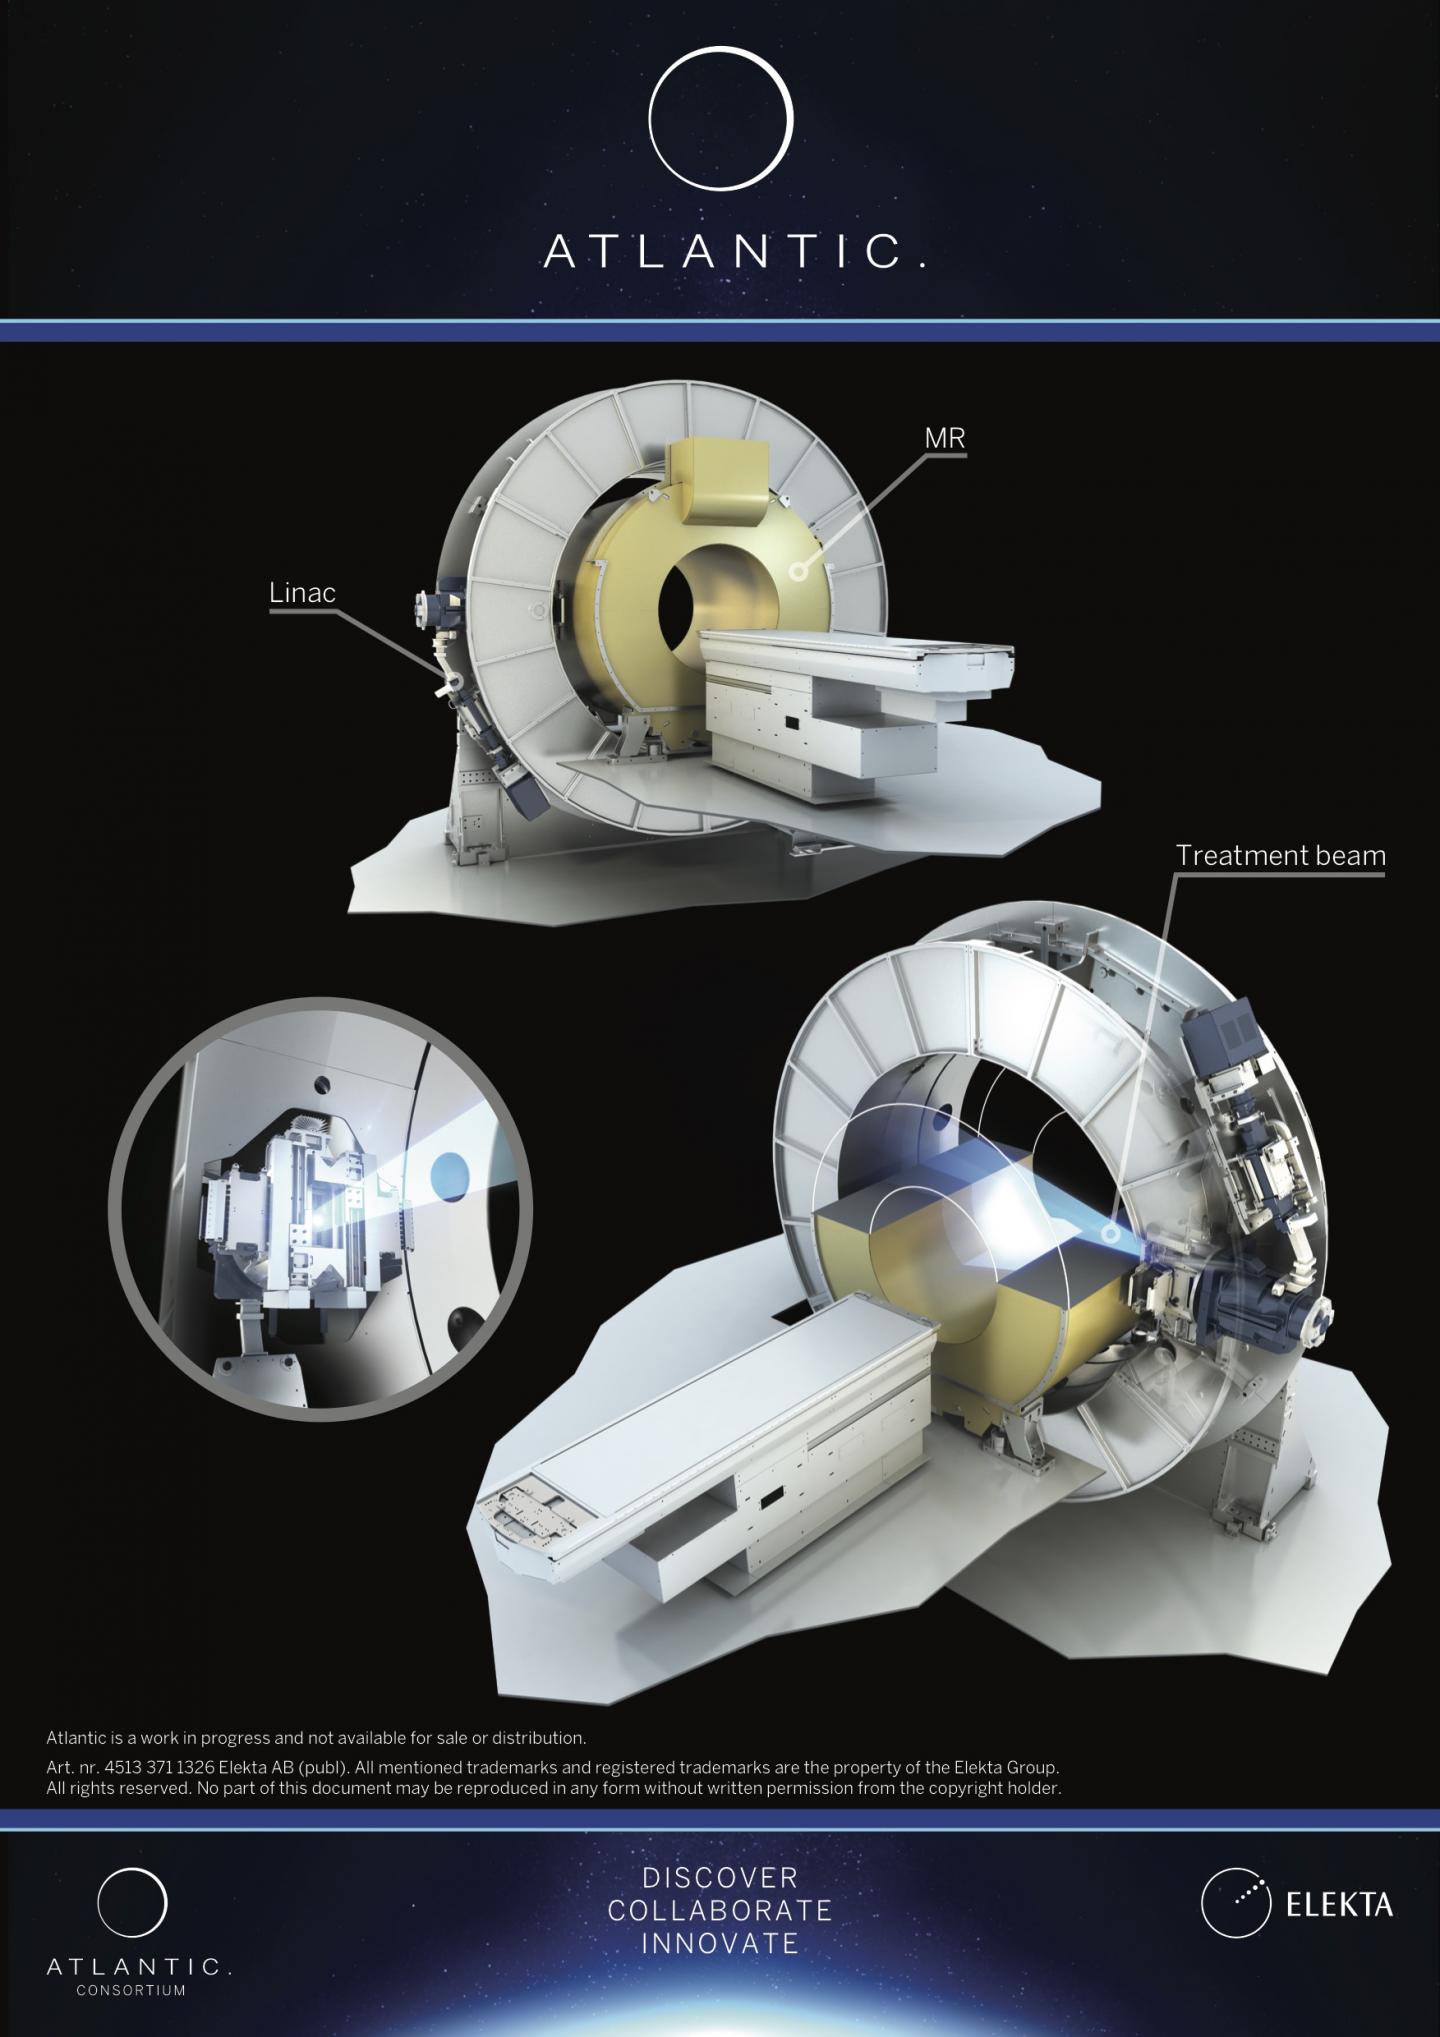 Illustration of the MR-linac